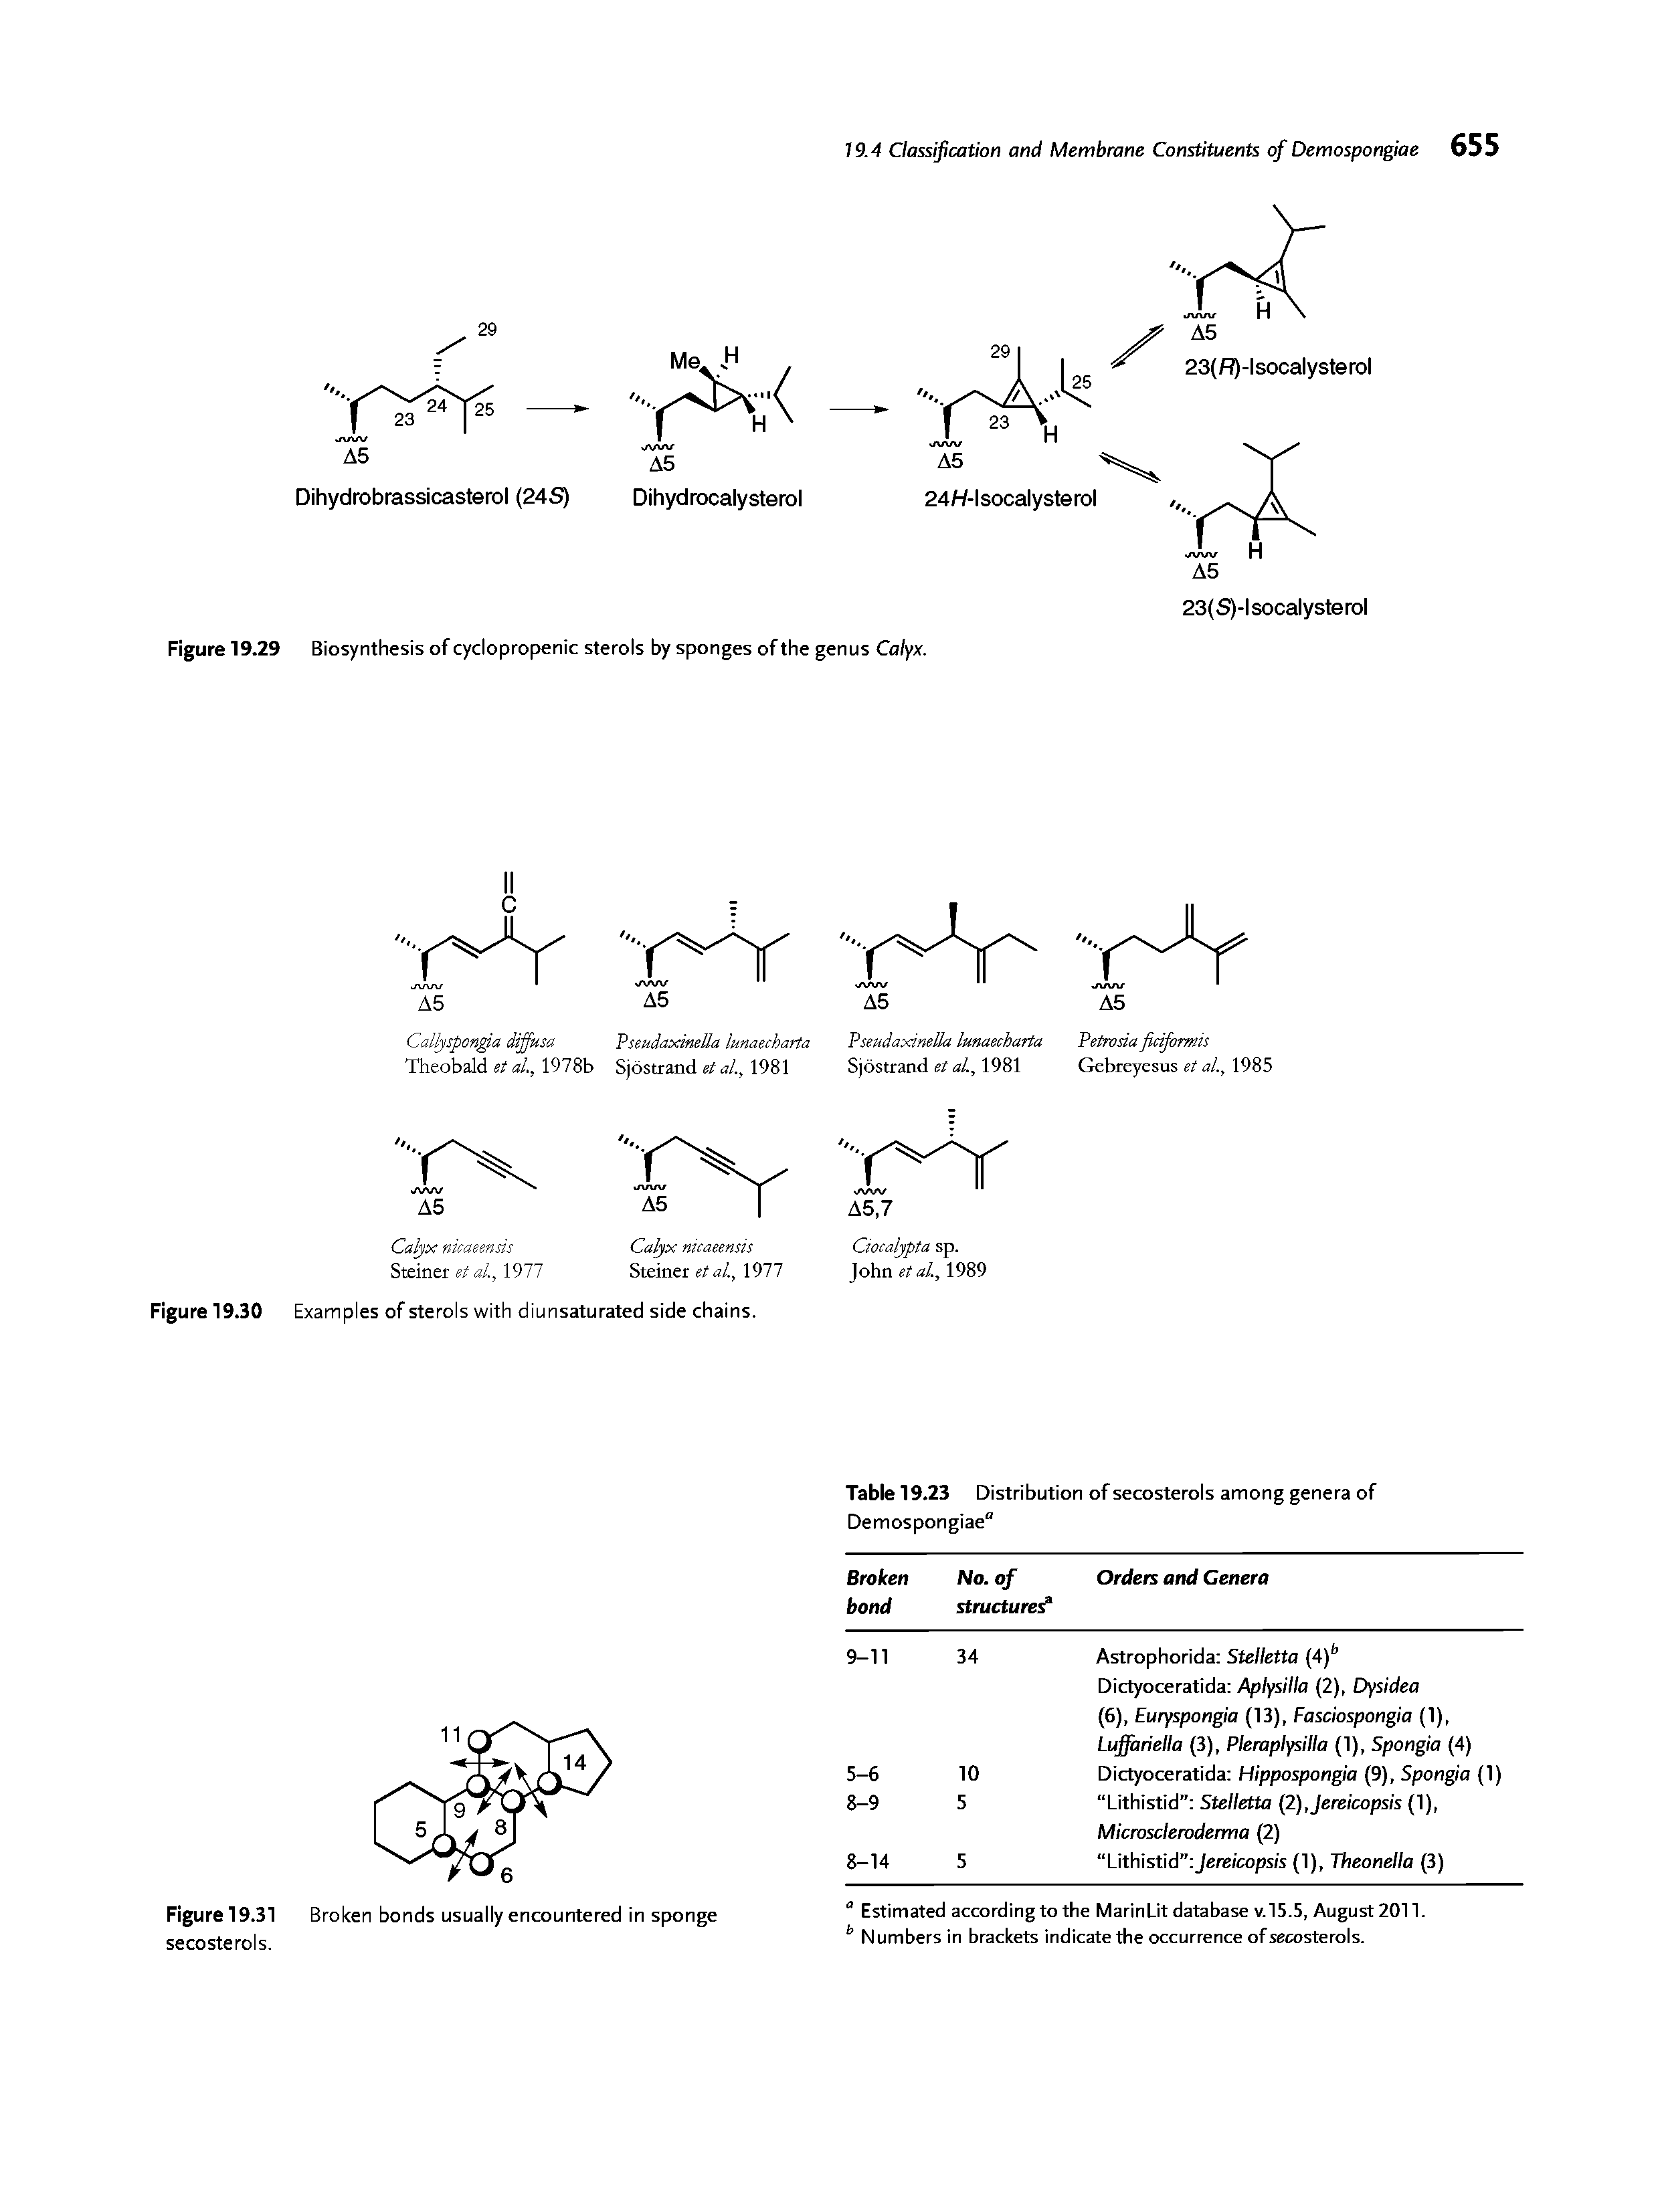 Figure 19.29 Biosynthesis of cyclopropenic sterols by sponges of the genus Calyx.